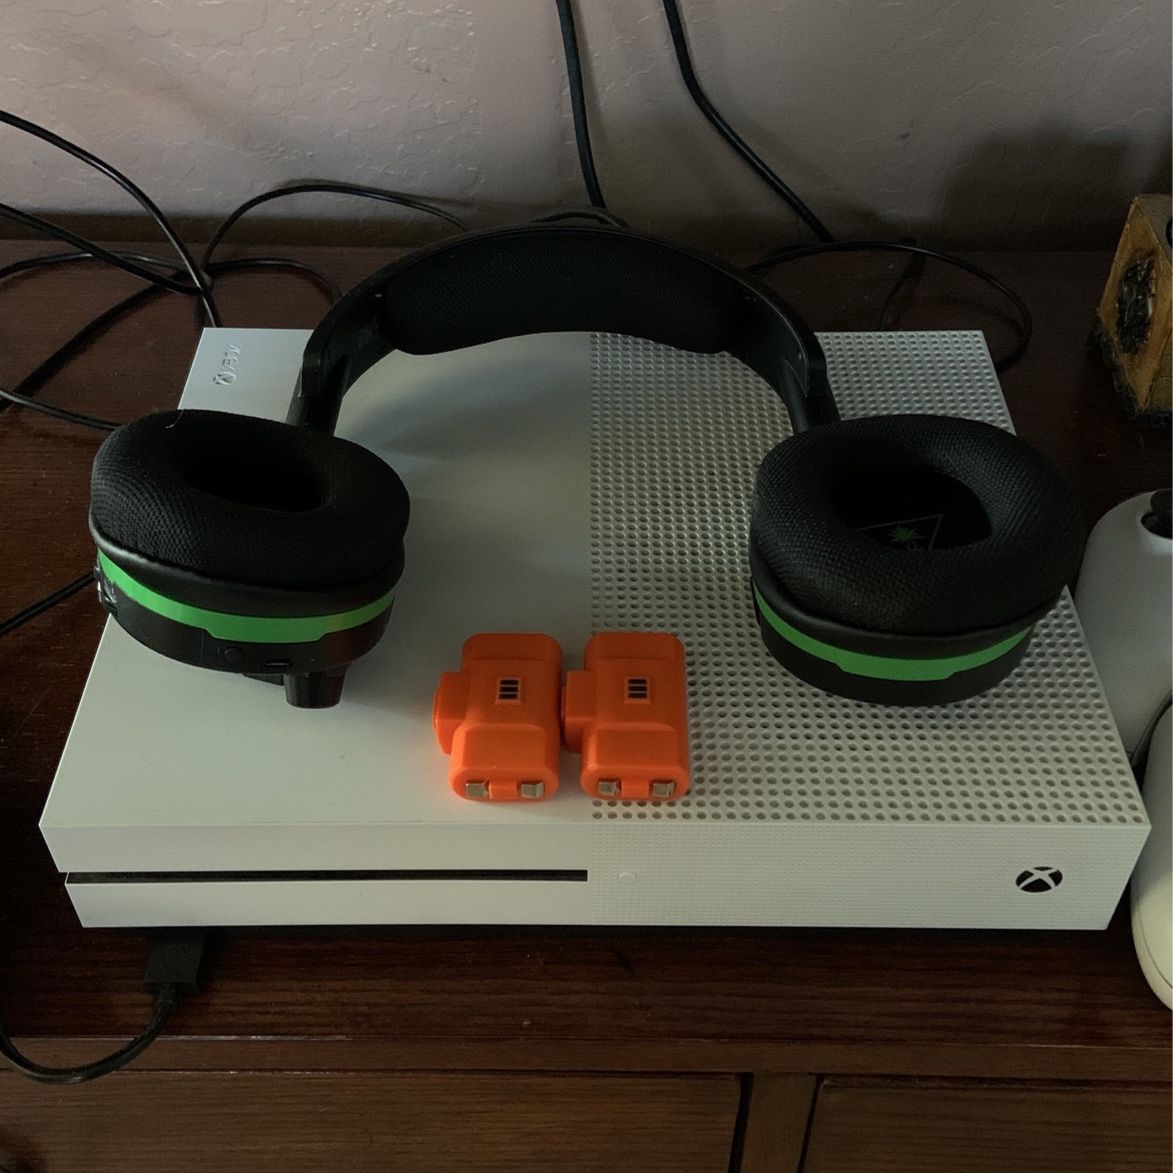 Xbox One, Turtle Beach Wireless Headphones, 3 Controllers and 2 Rechargeable Battery Sets